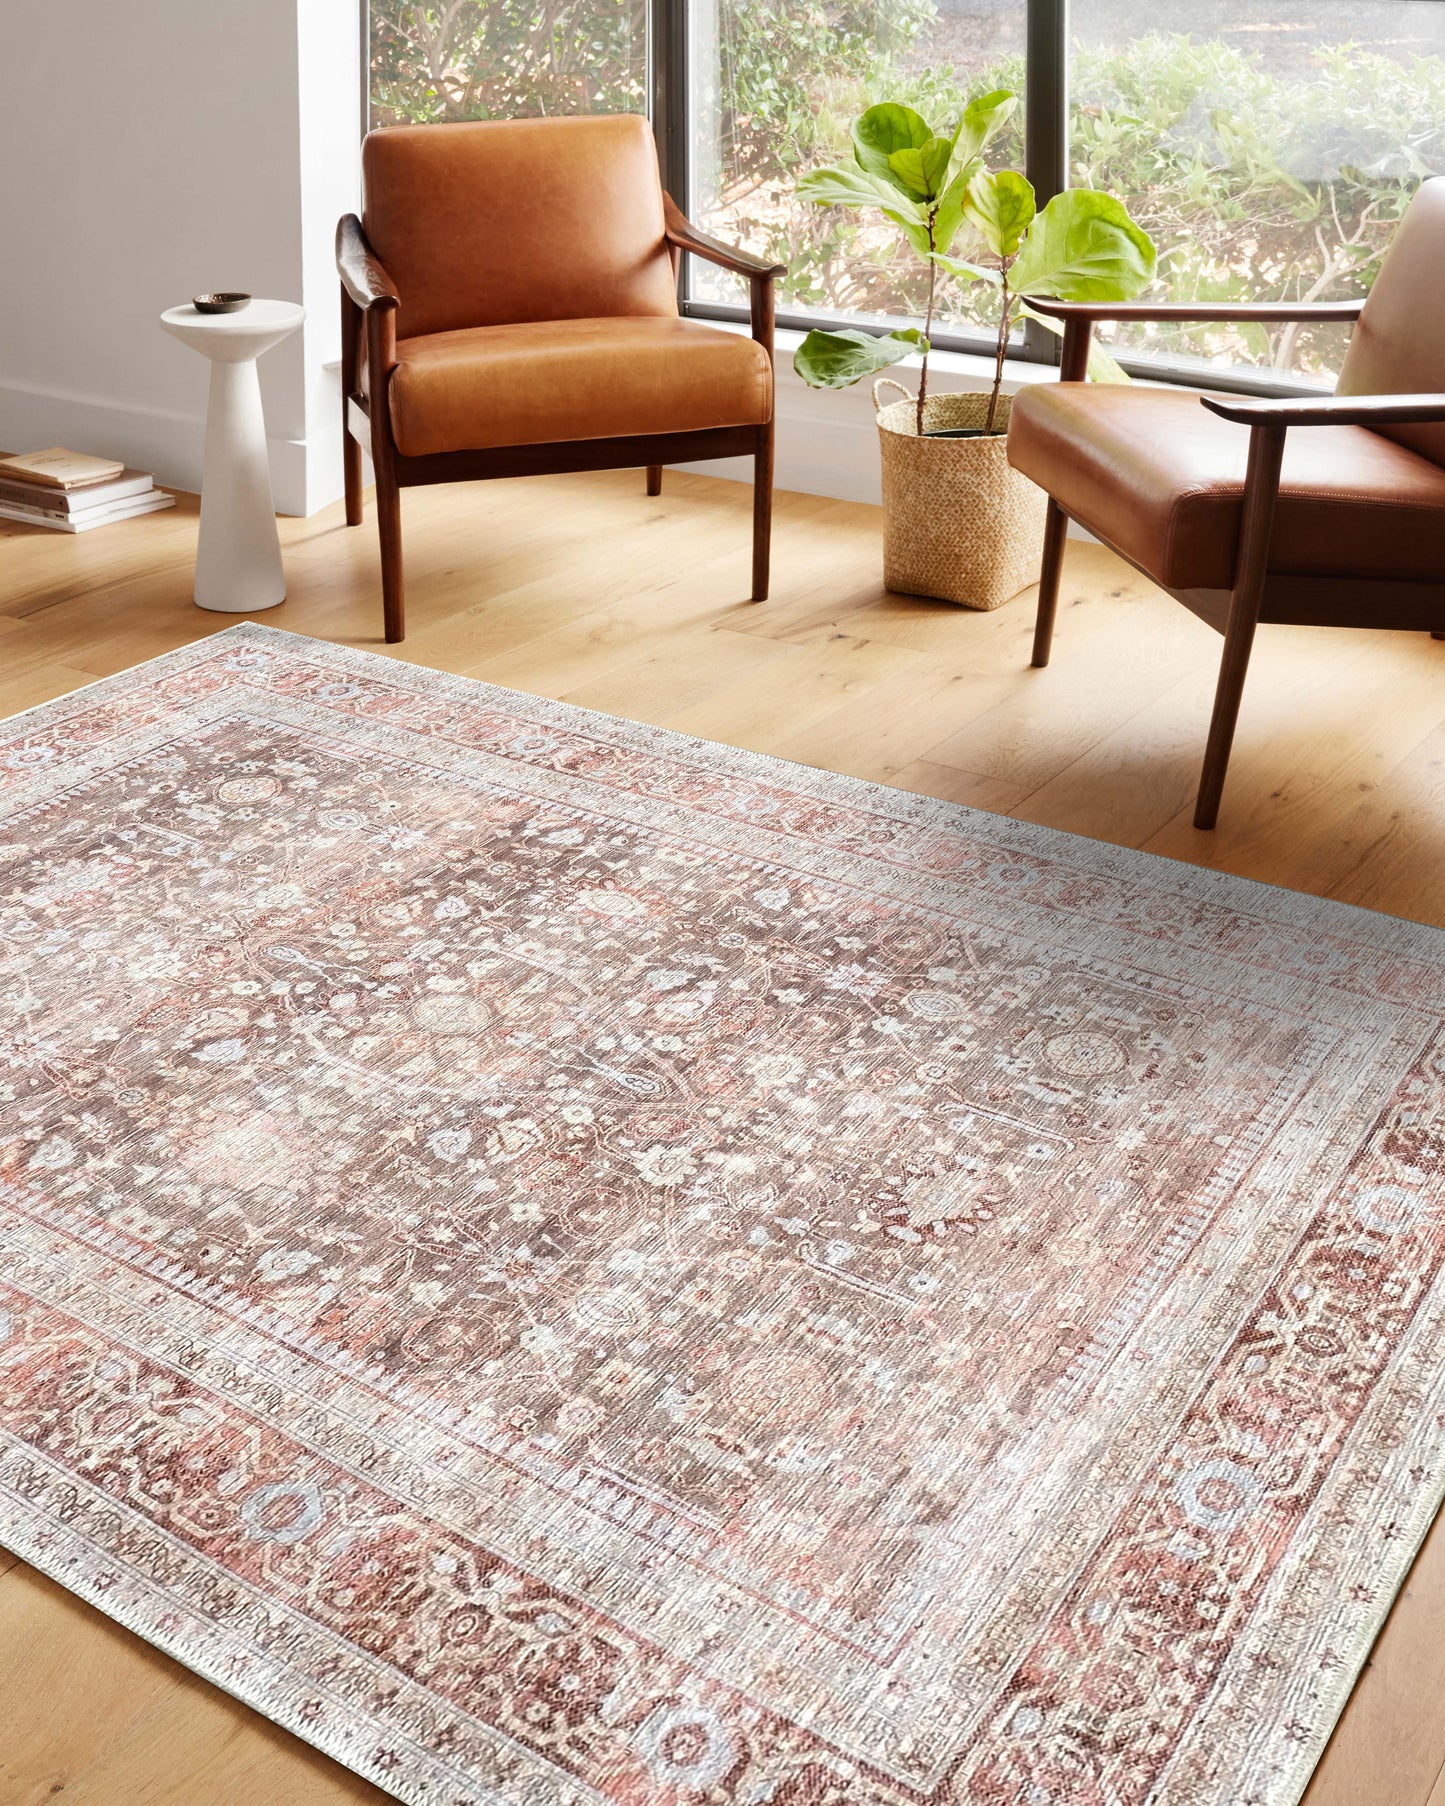 Traditional Persian Area Rug, Faded Distressed Earth tone Brown Terracotta Floral Vintage Living Room Bedroom Dining Kitchen Luxury Kitche